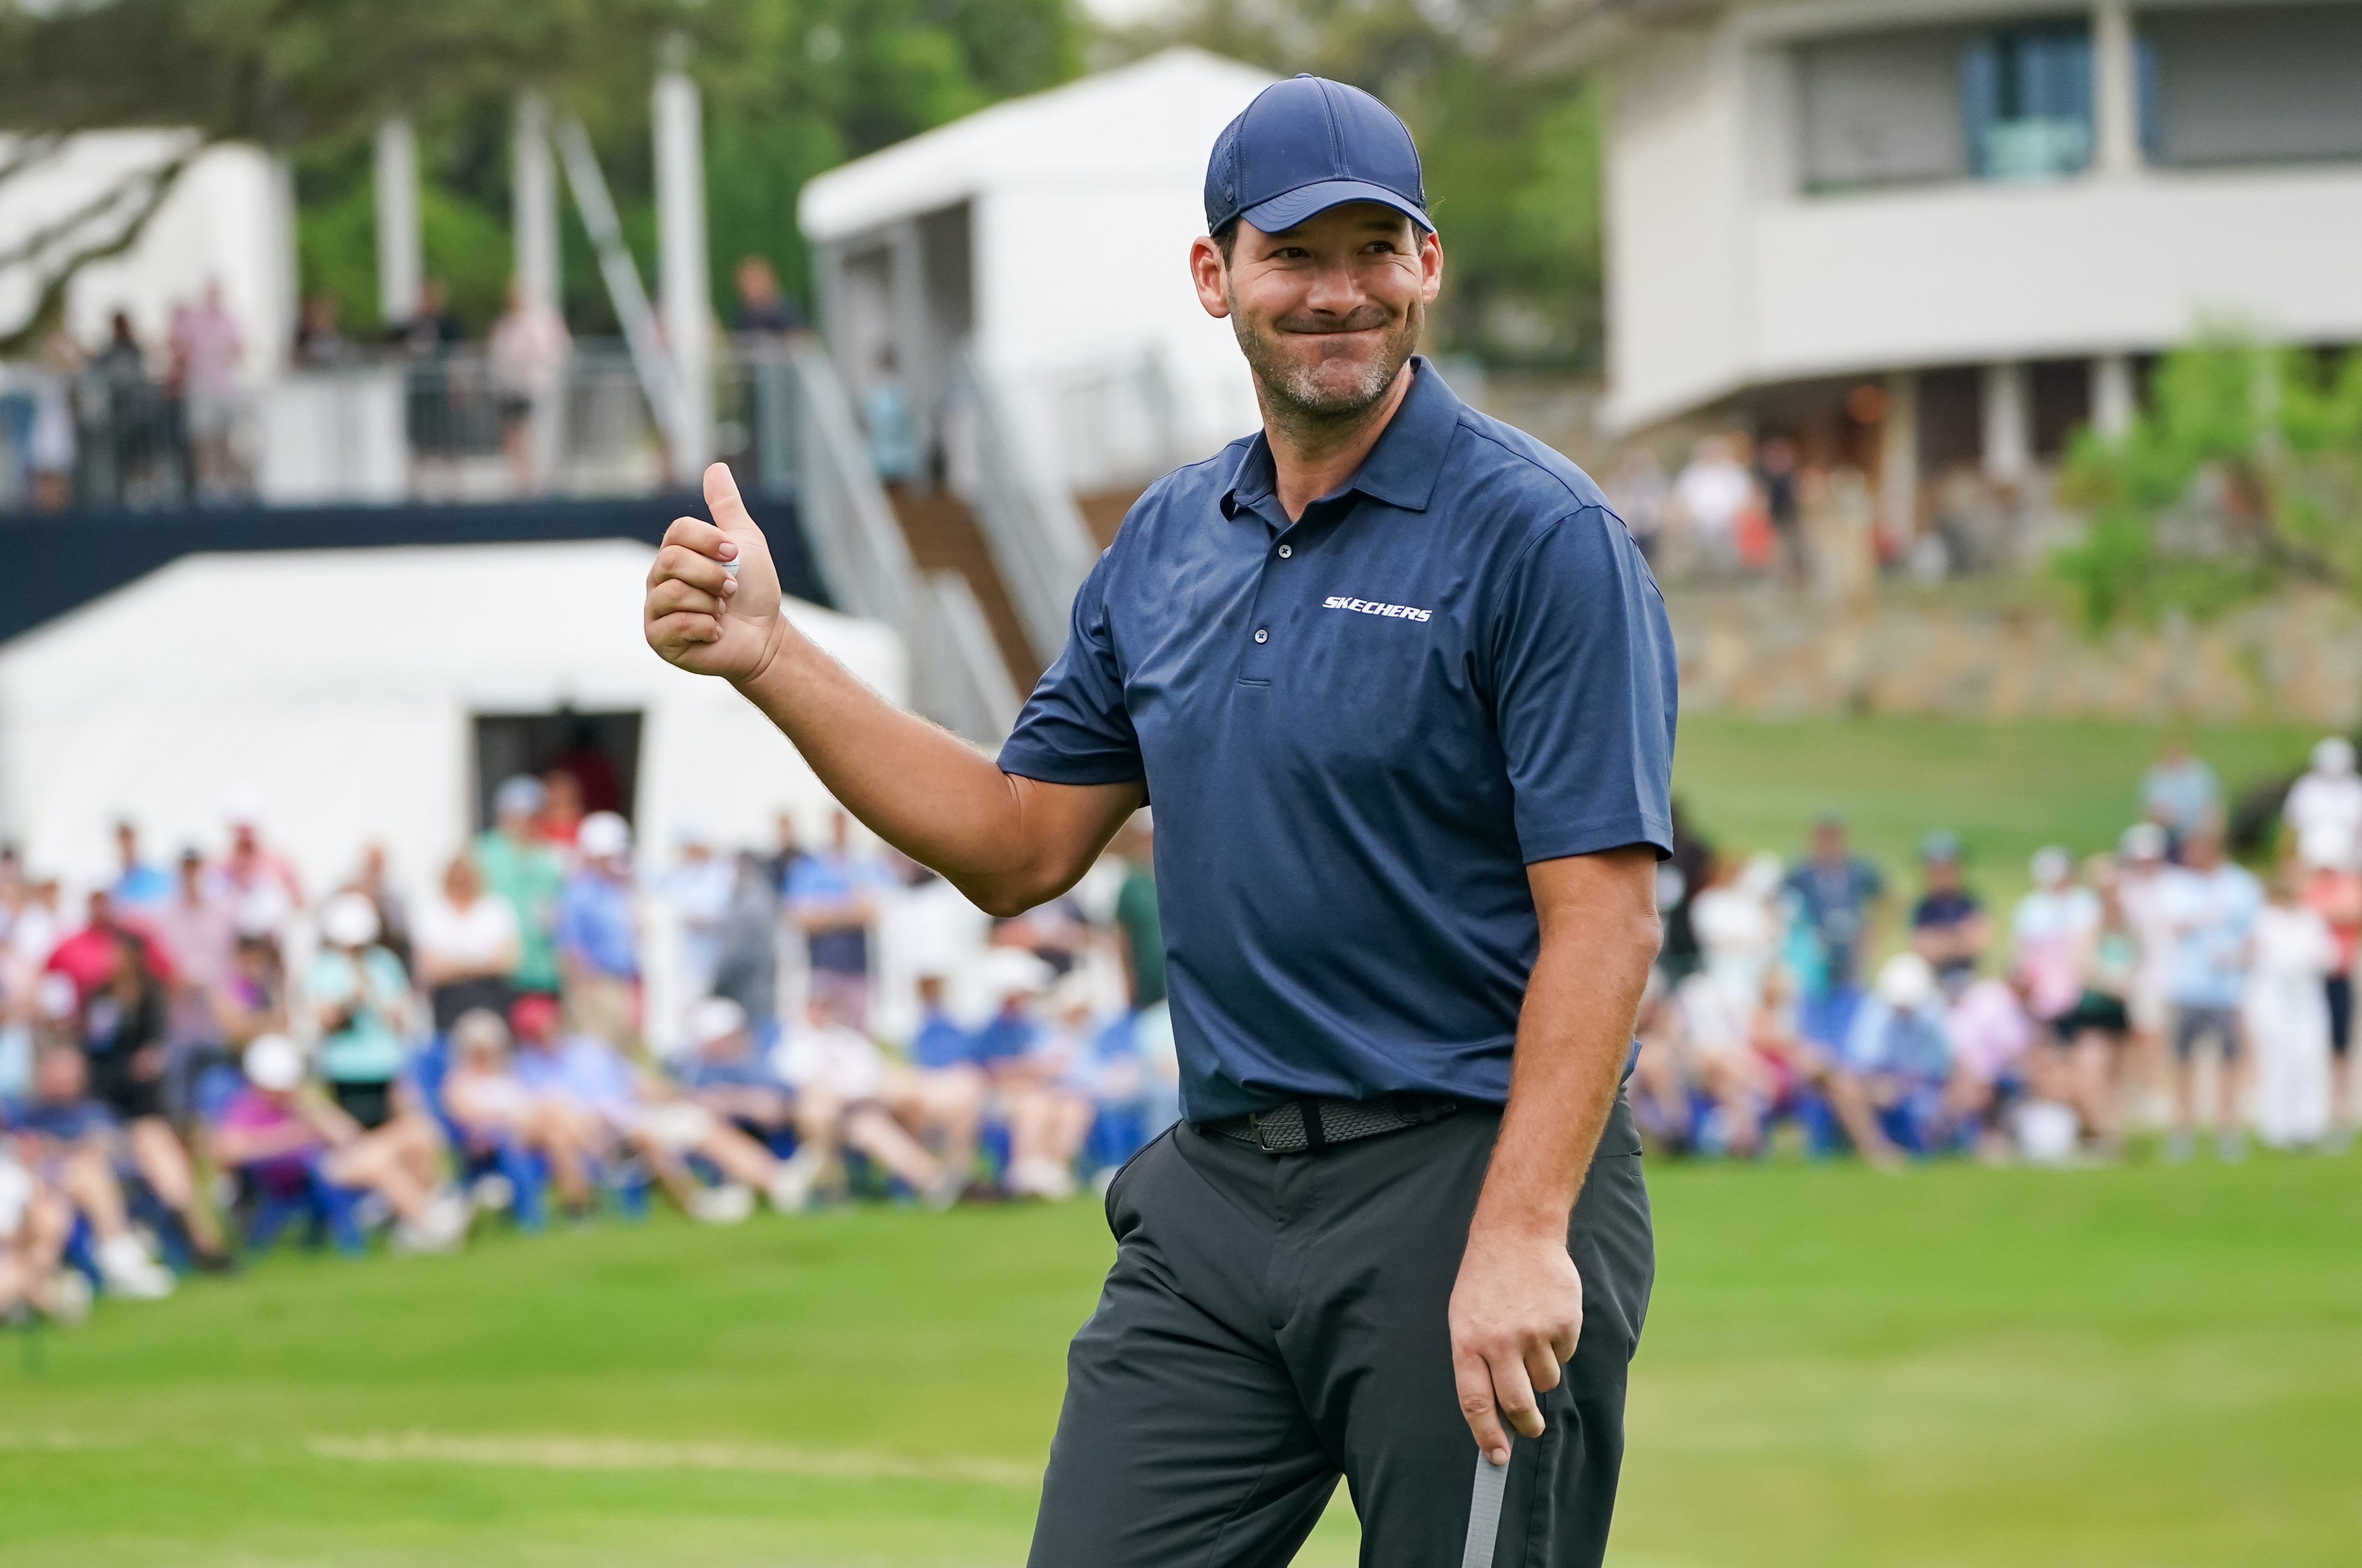 Tony Romo with 6-foot-10 high school senior to qualify for U.S. Amateur Four-Ball | Golf News and Tour |